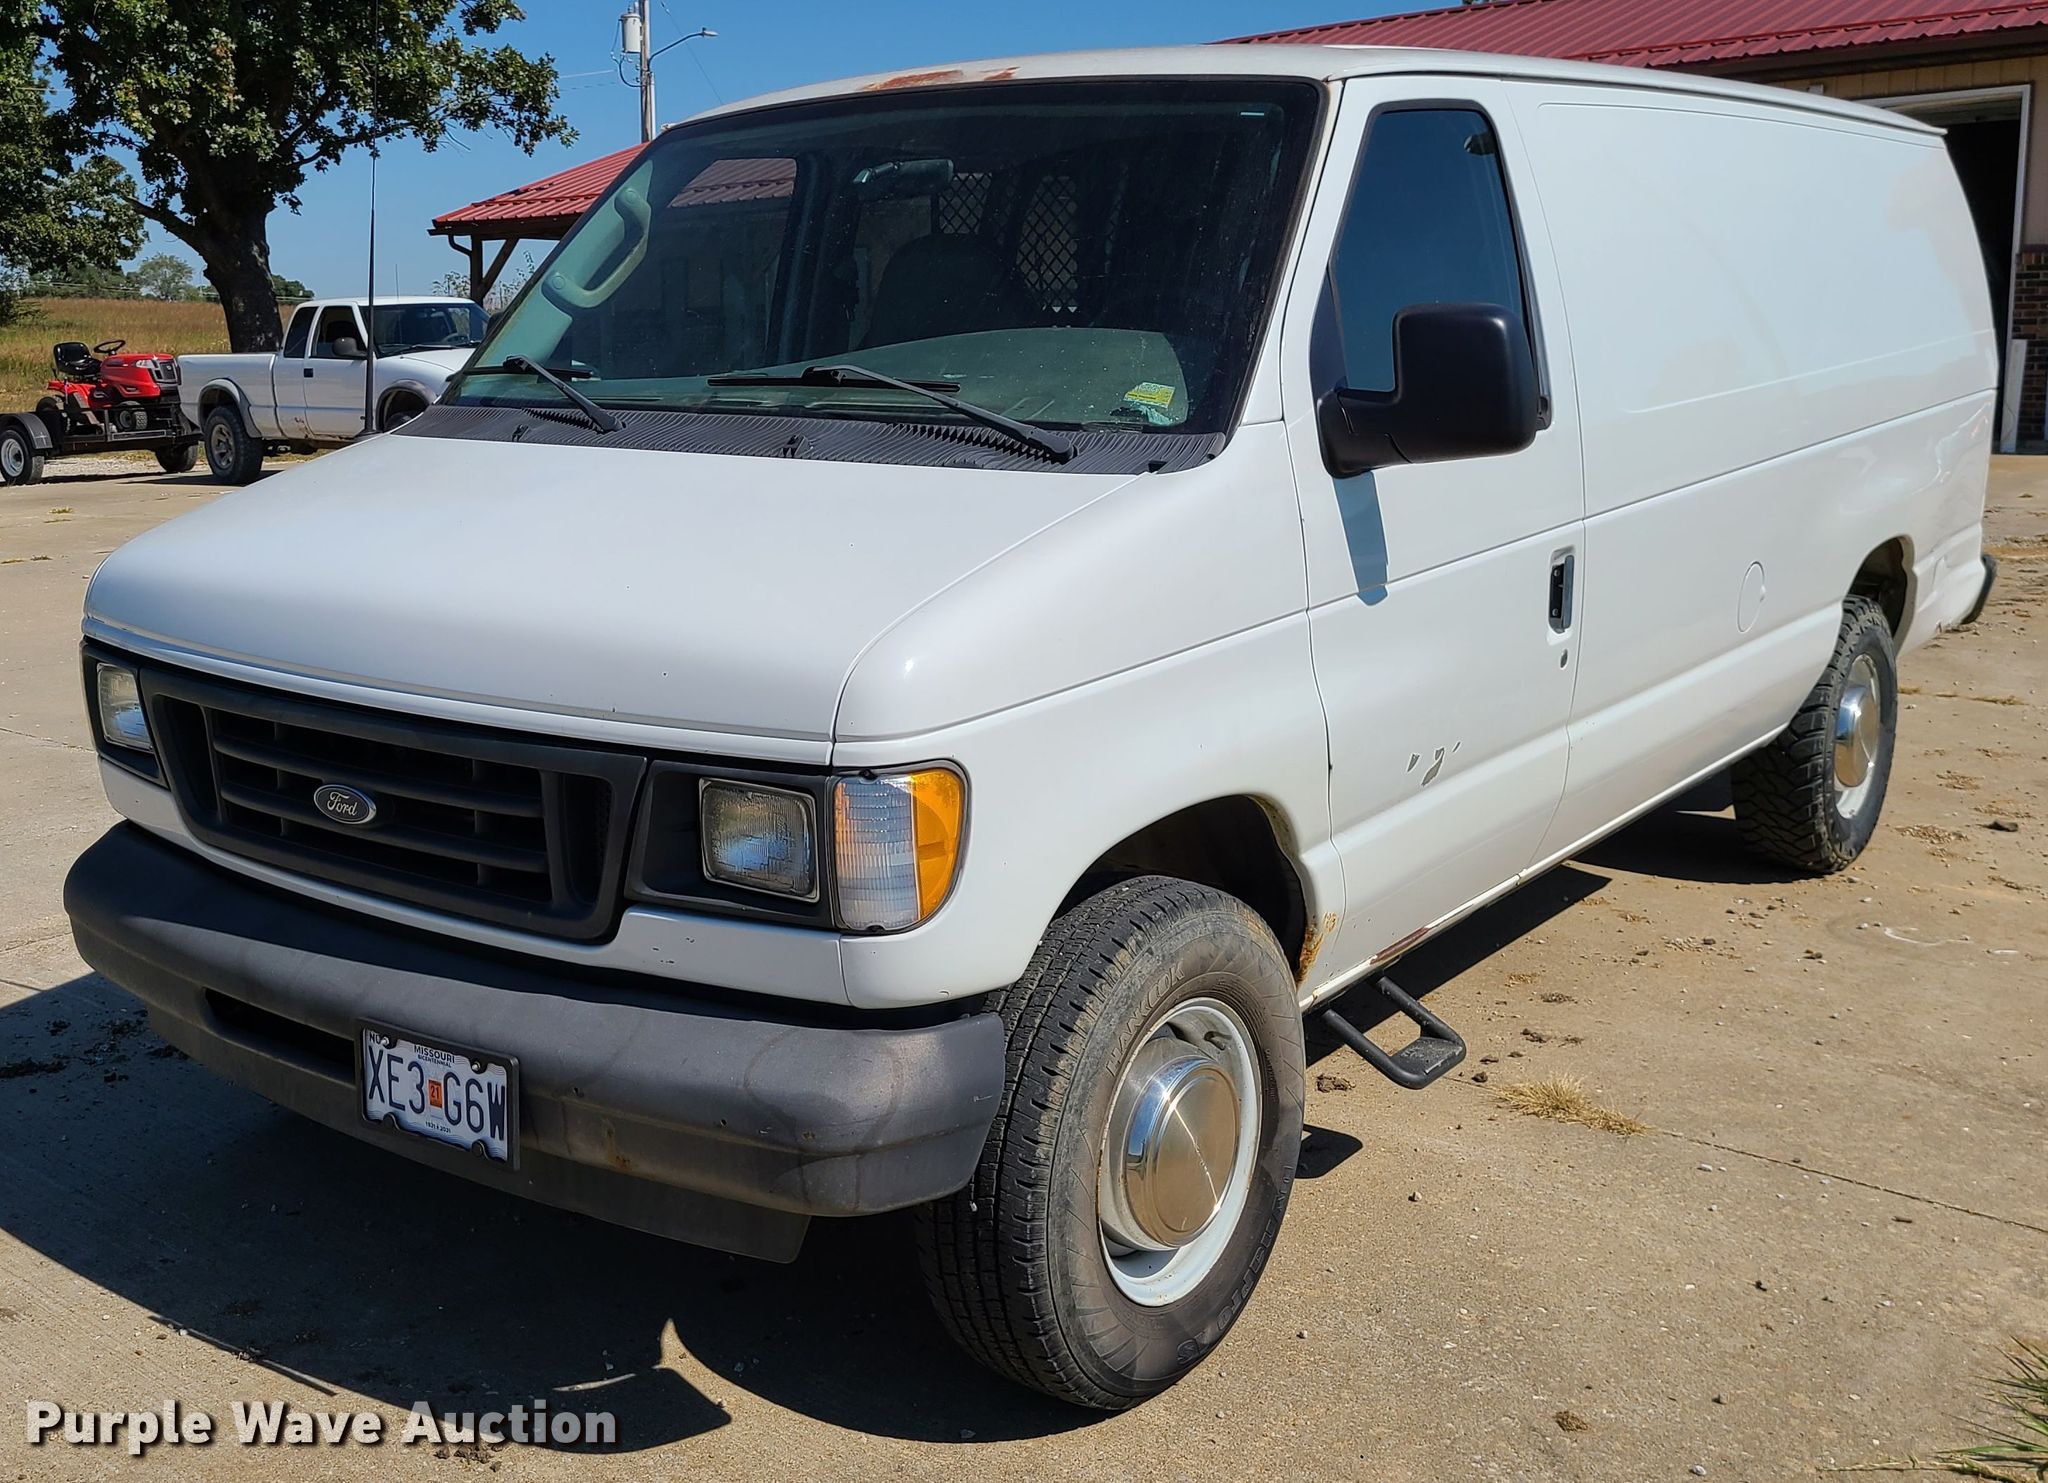 2003 Ford E250 van in Warsaw, MO | Item L1250 sold | Purple Wave